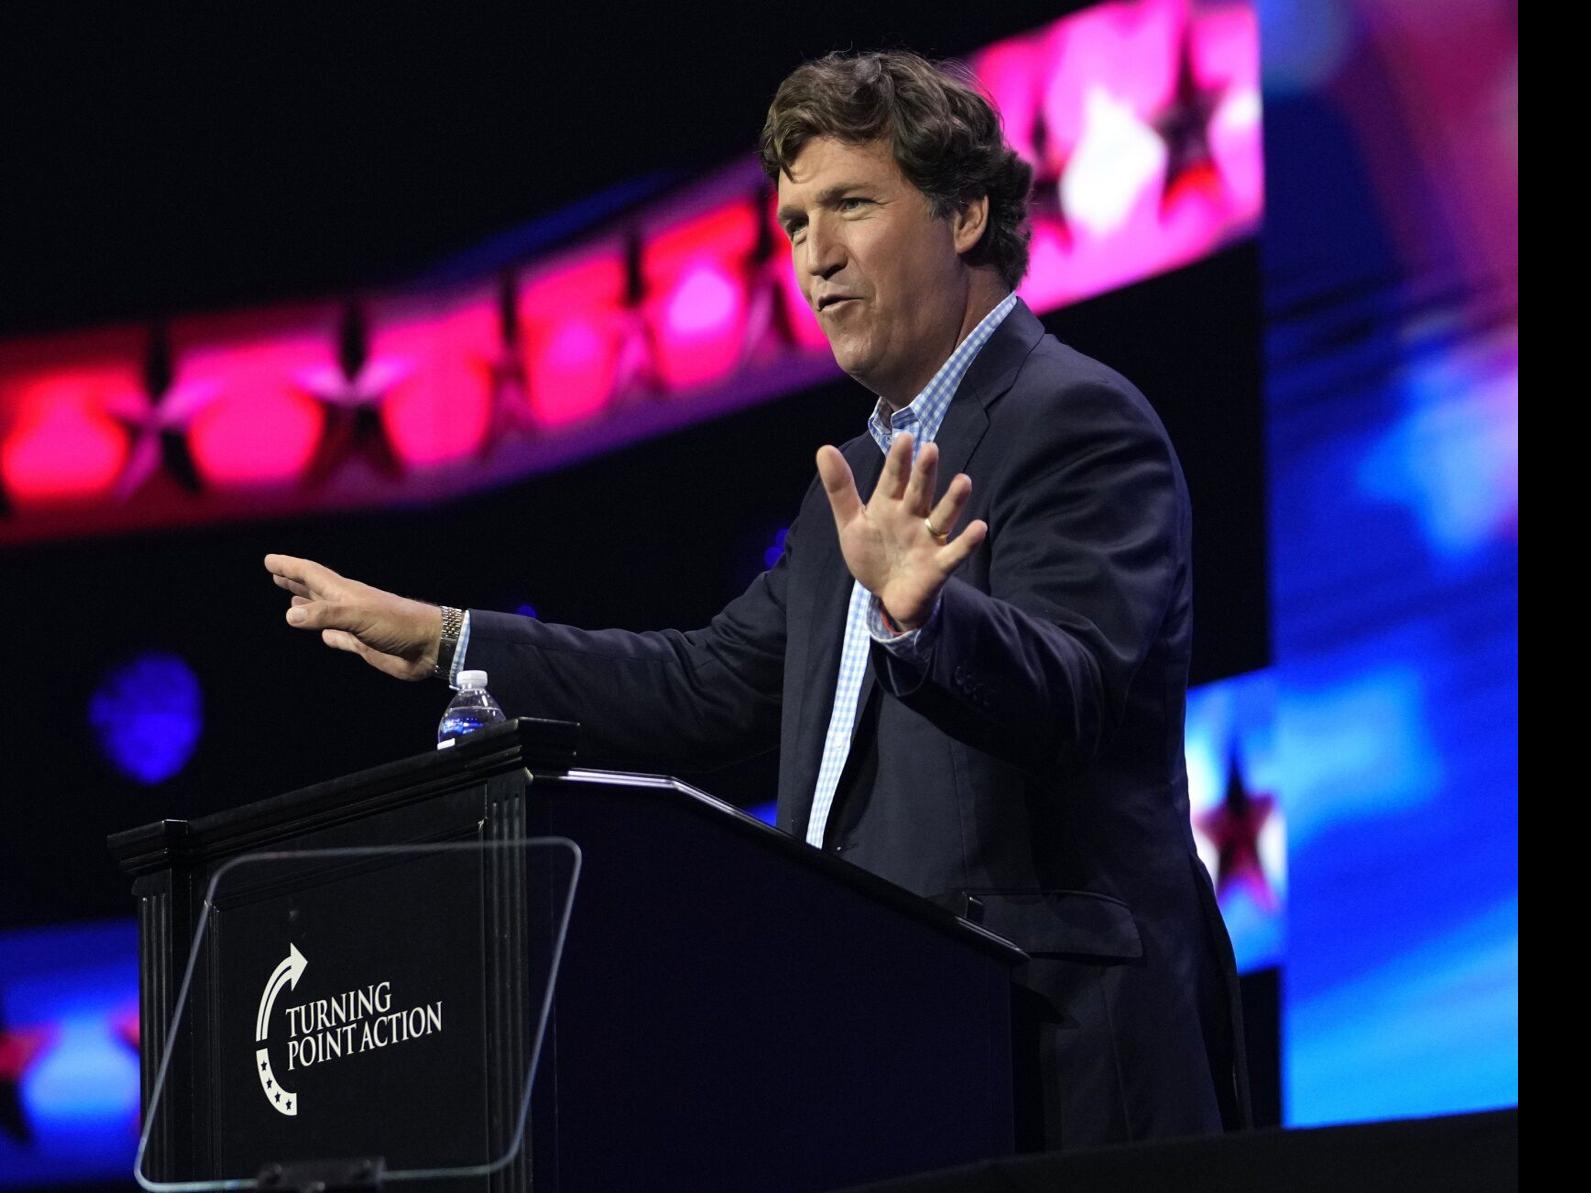 Tucker Carlson and the American culture wars come to Canada